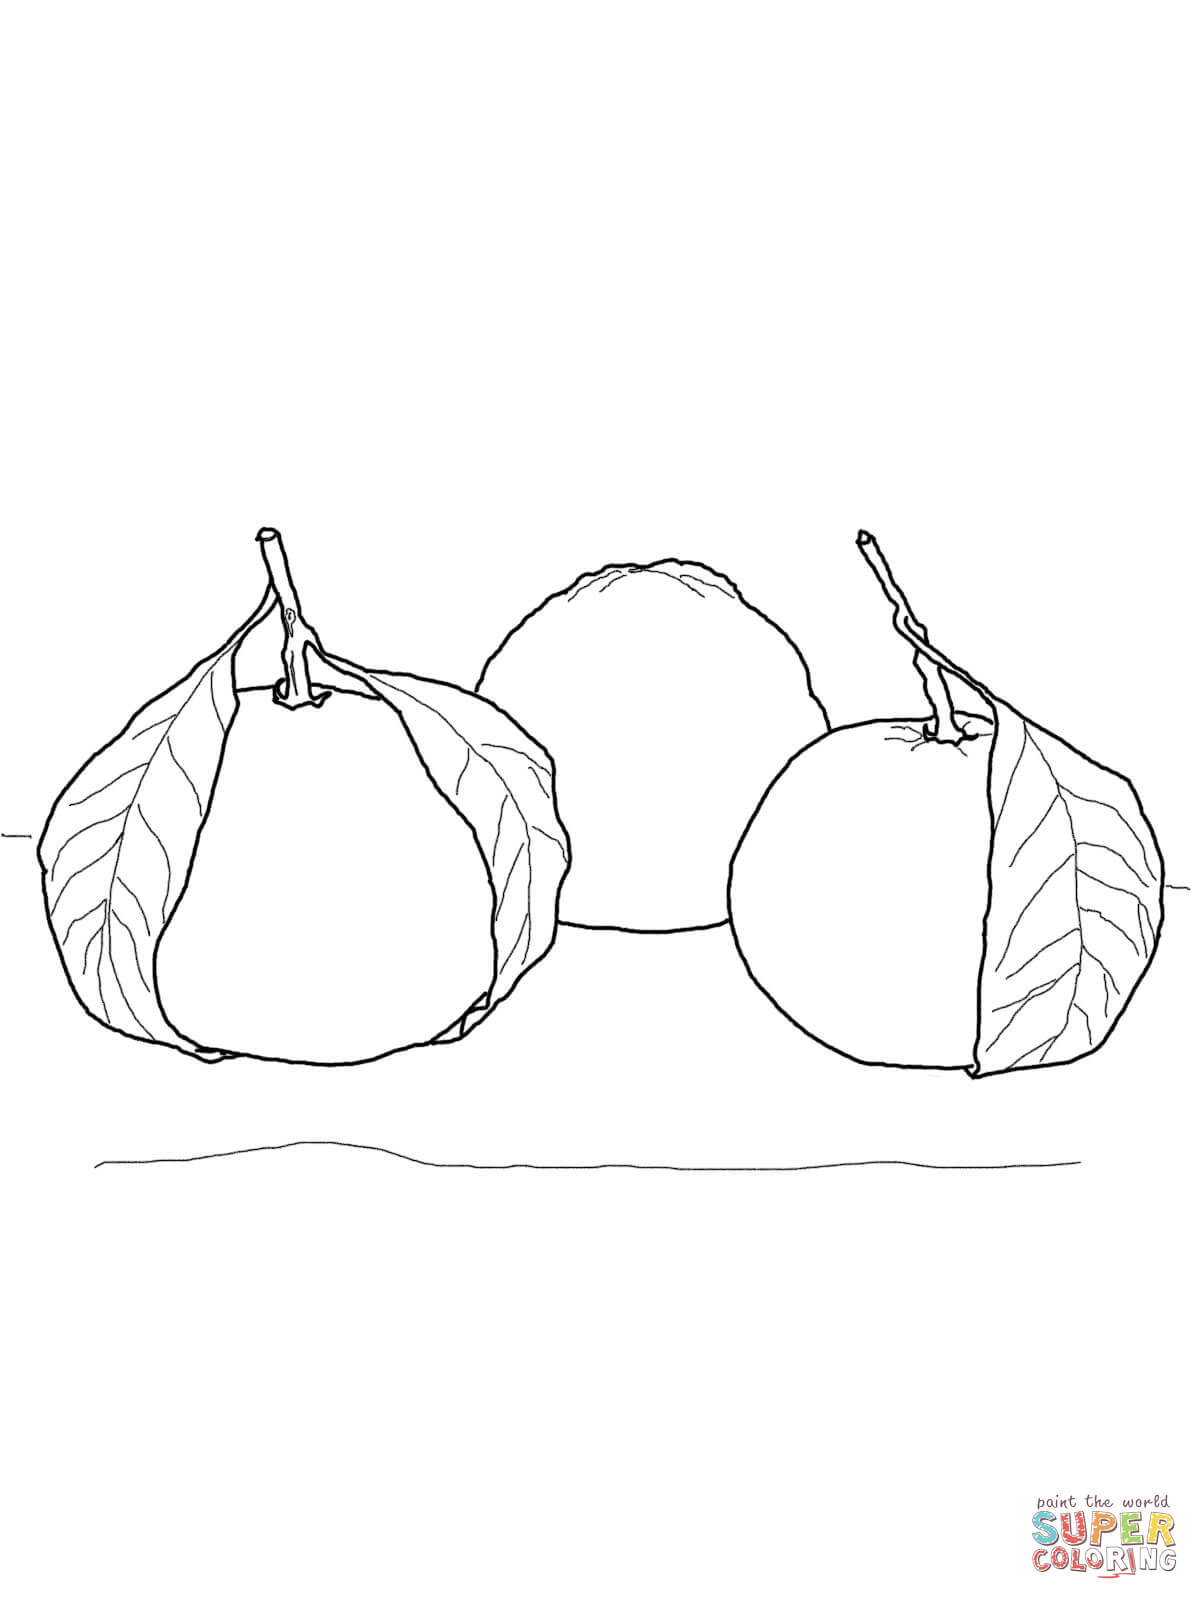 Oranges coloring pages | Free Coloring Pages